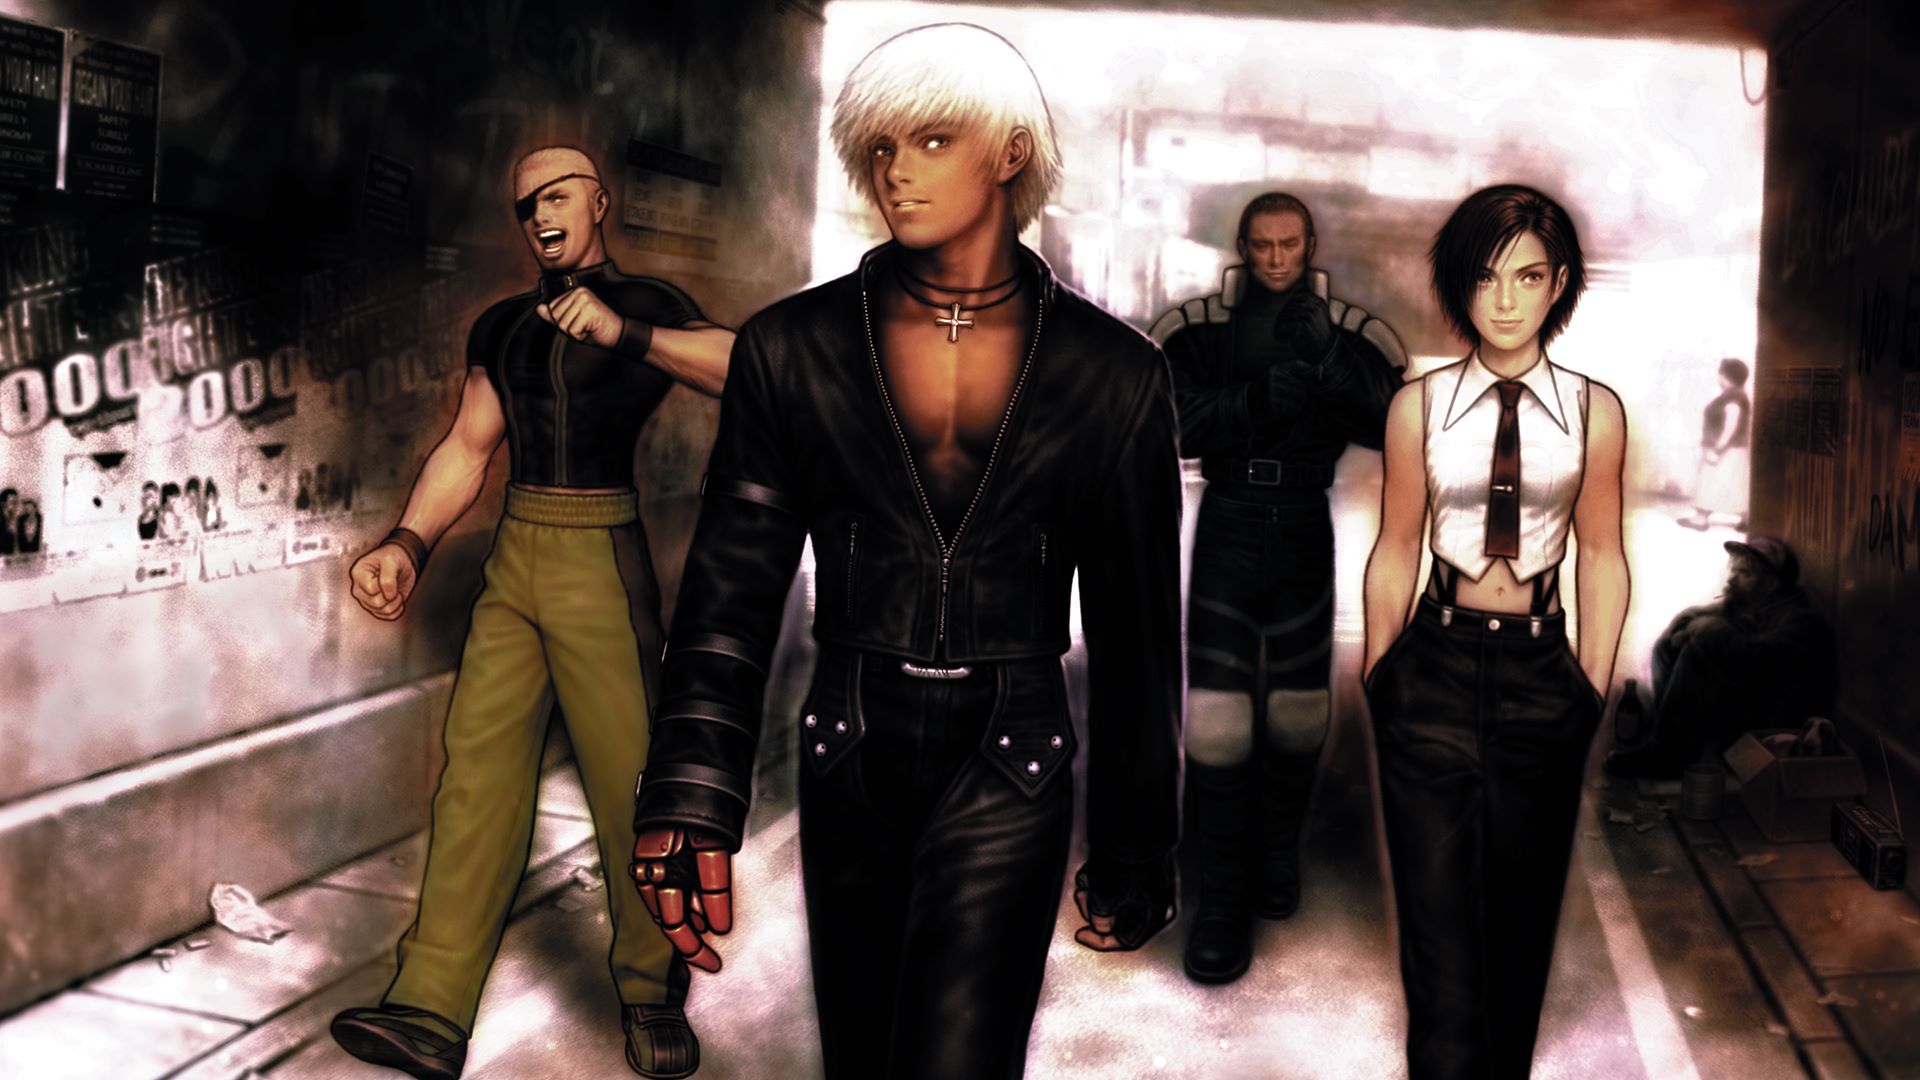 Final lineup of SNK games on  Prime Gaming announced